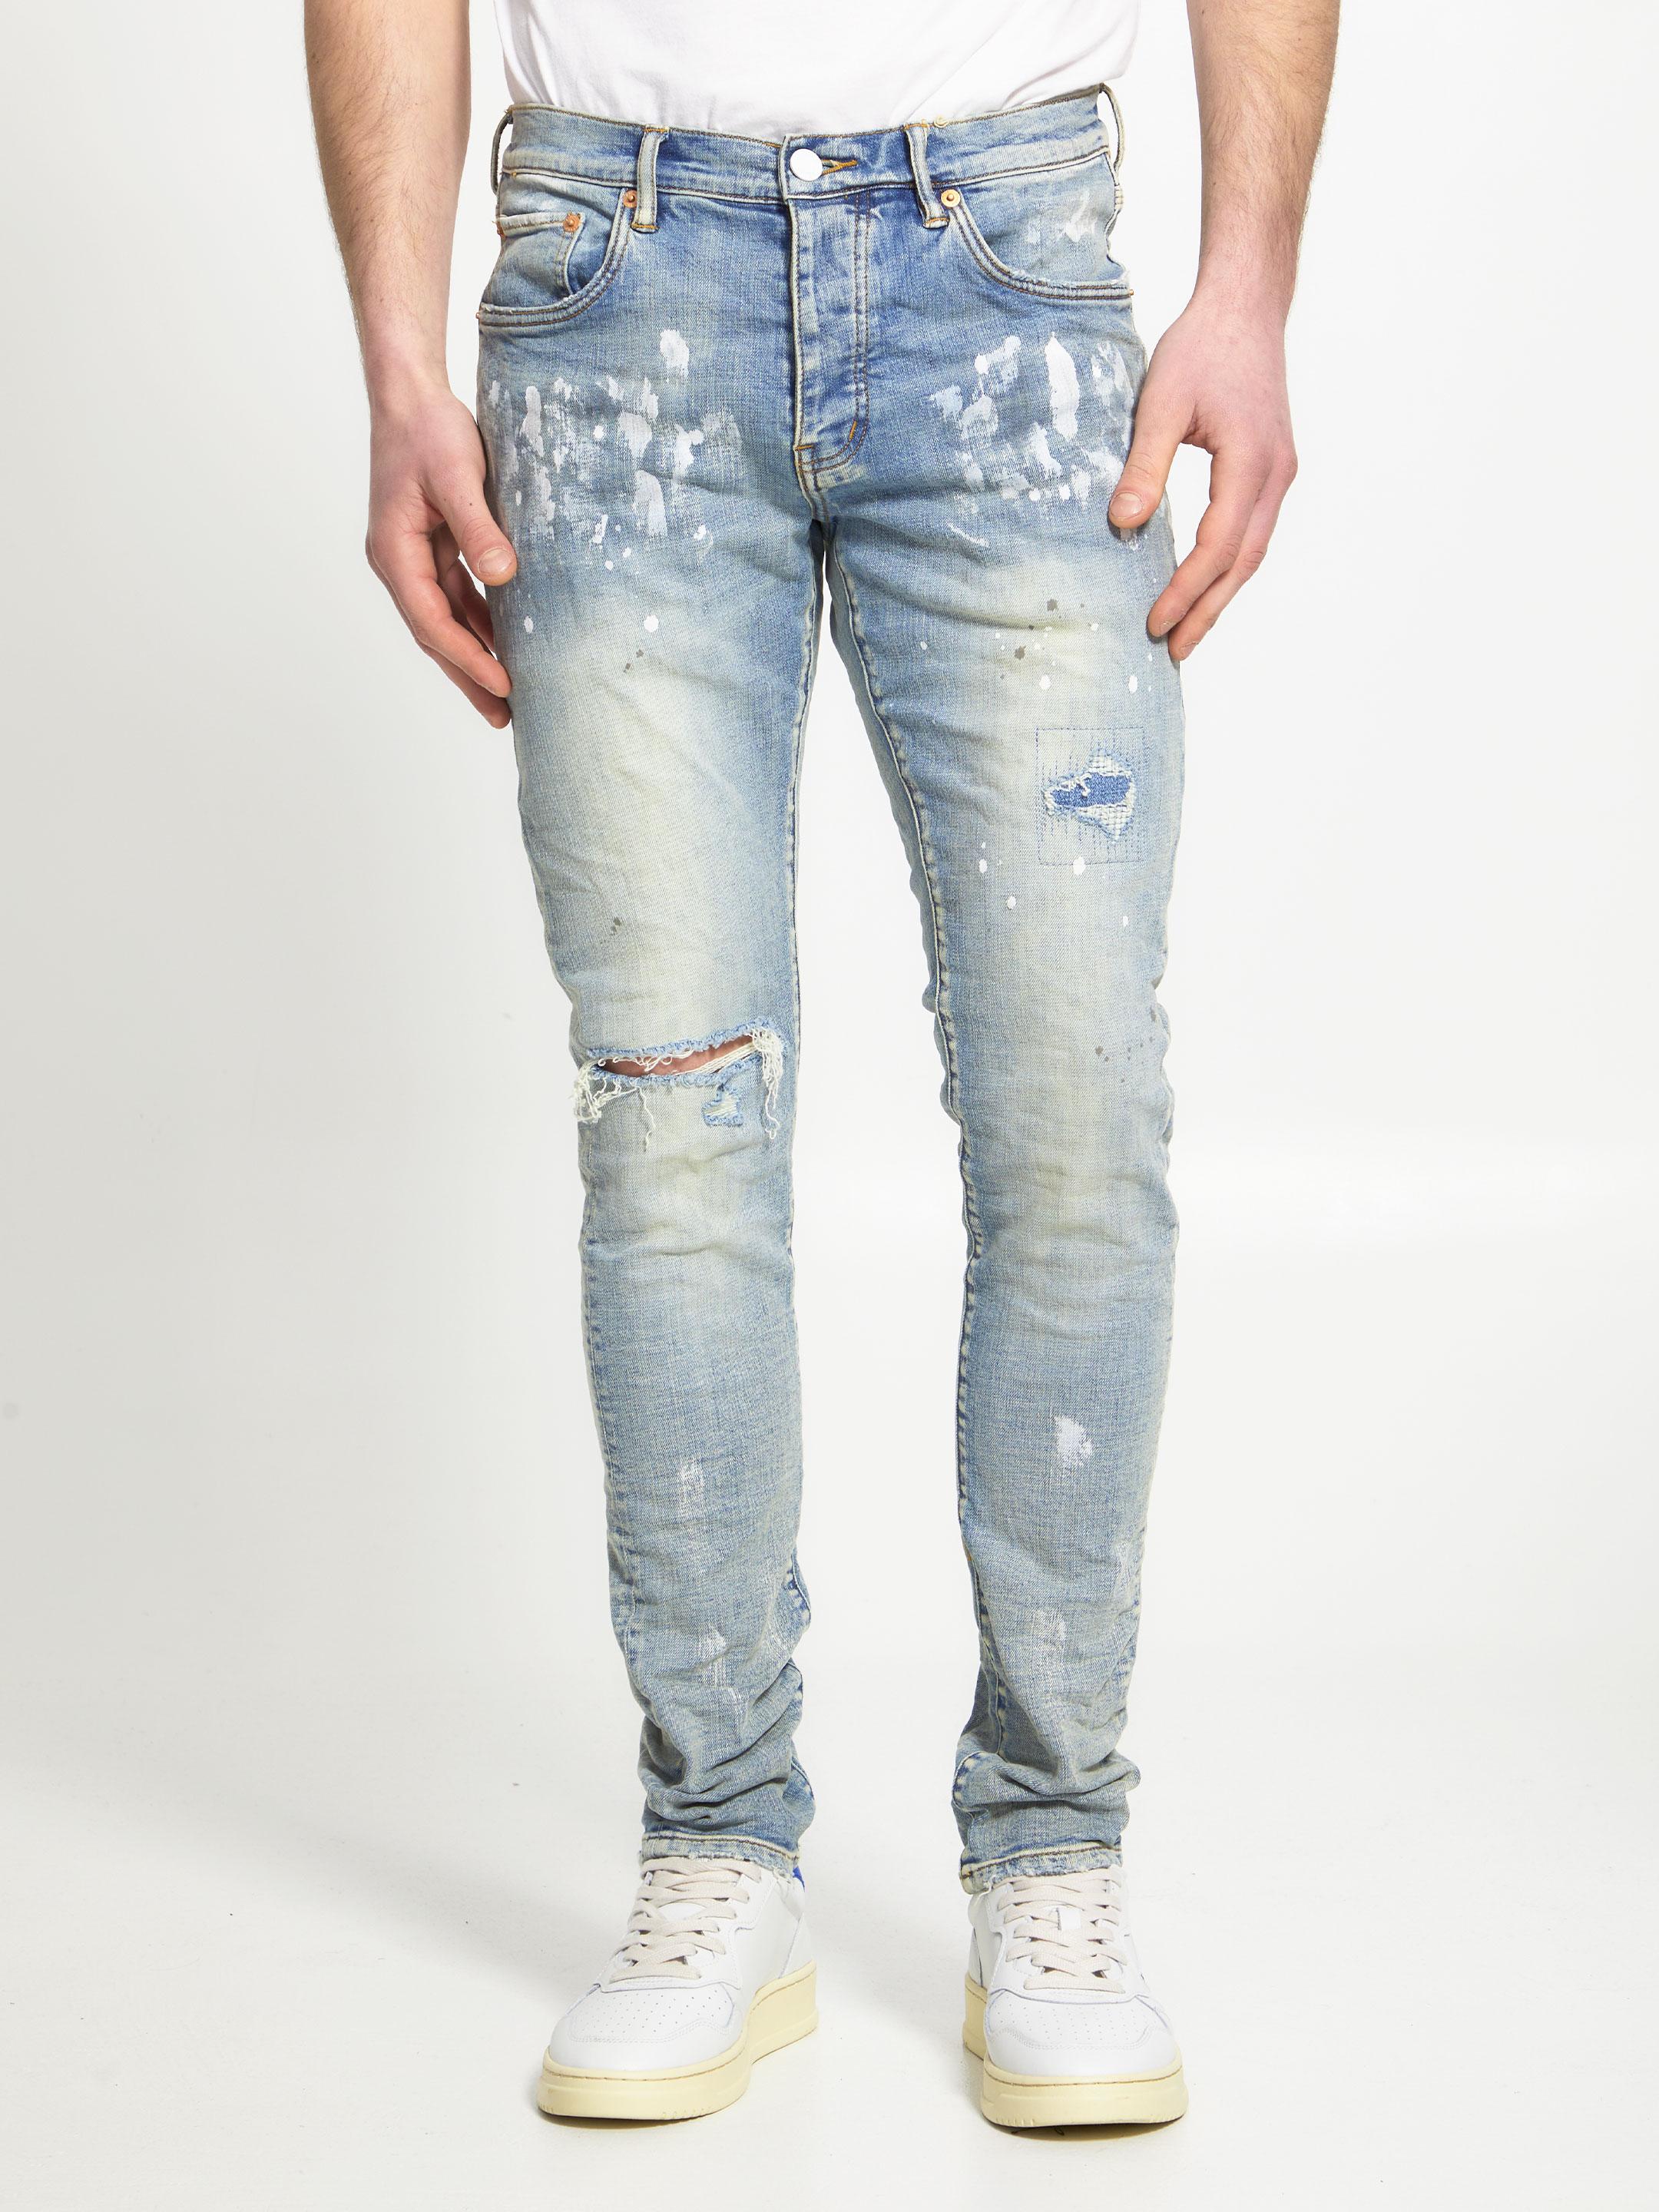 PURPLE BRAND, Mid Rise Distressed Jeans, Men, Tapered Jeans